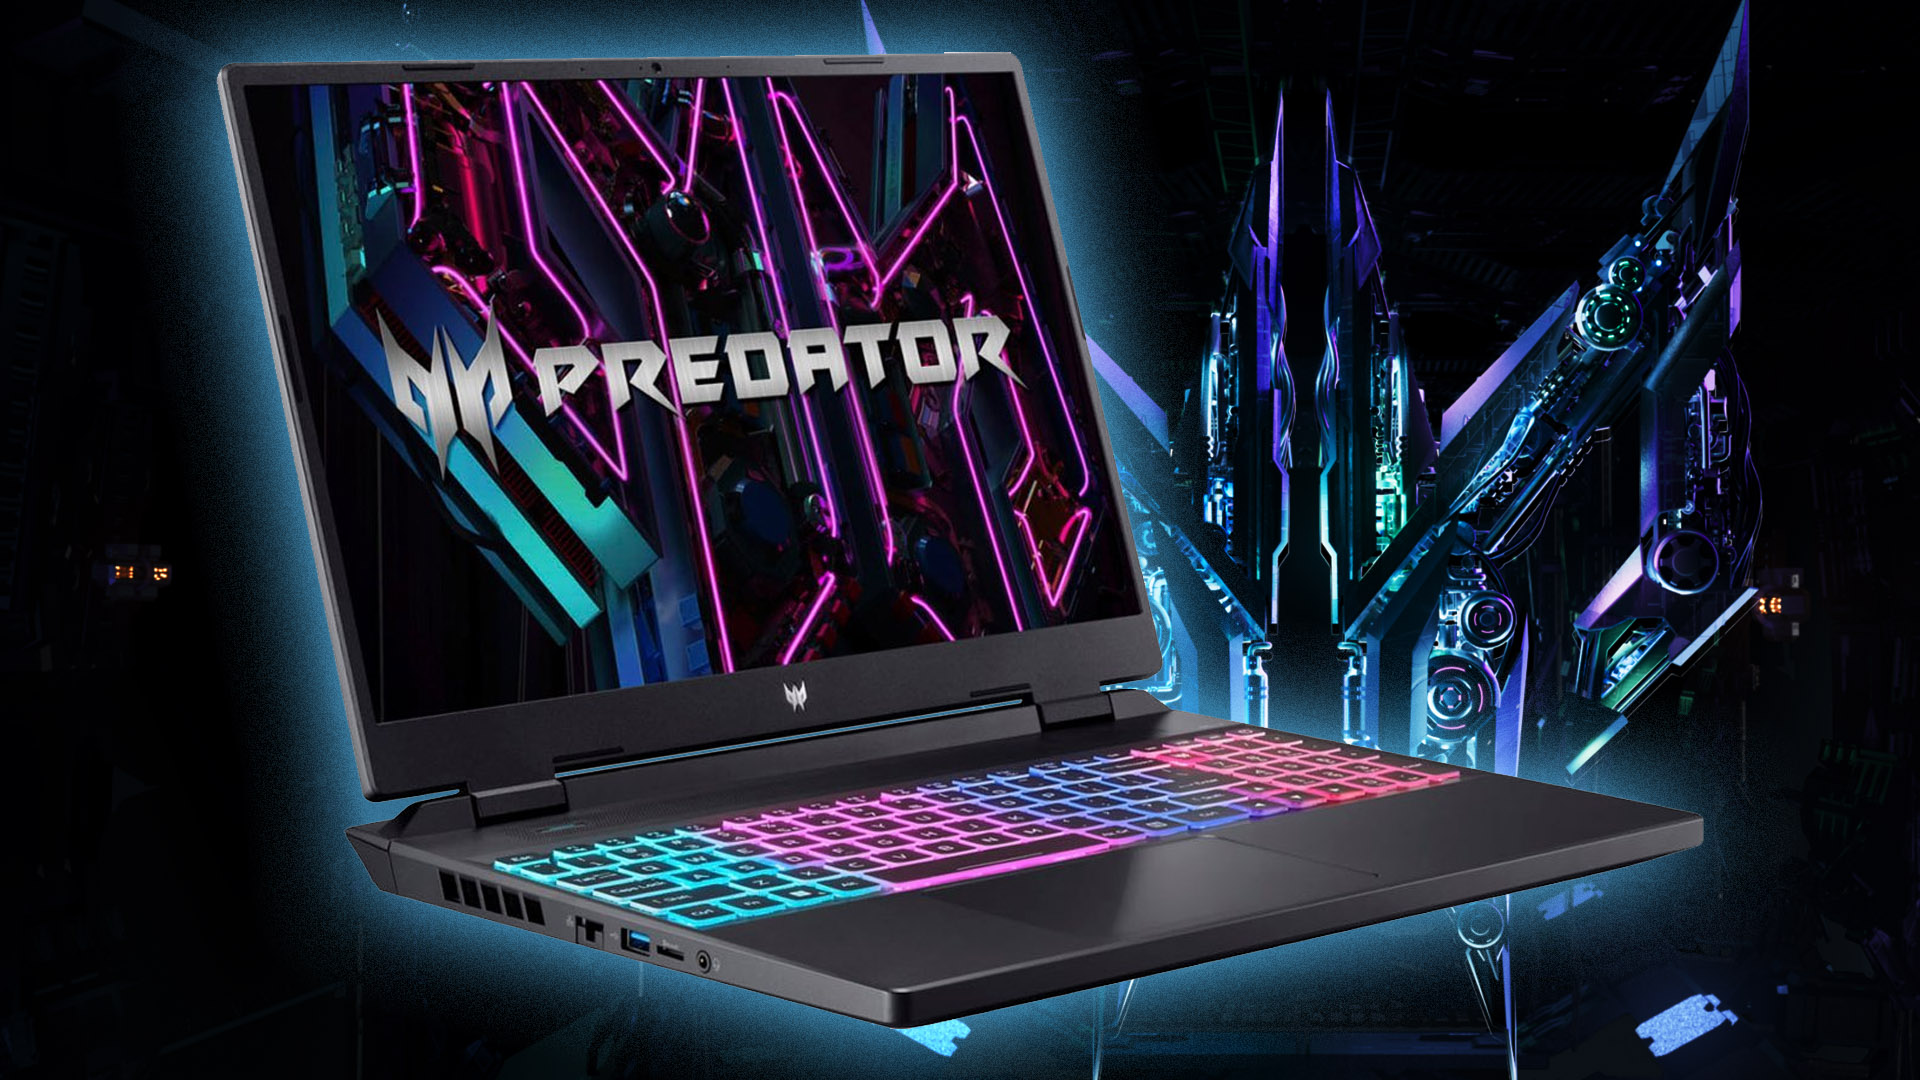 Rating this RTX-powered Acer Predator gaming computer computer for $800